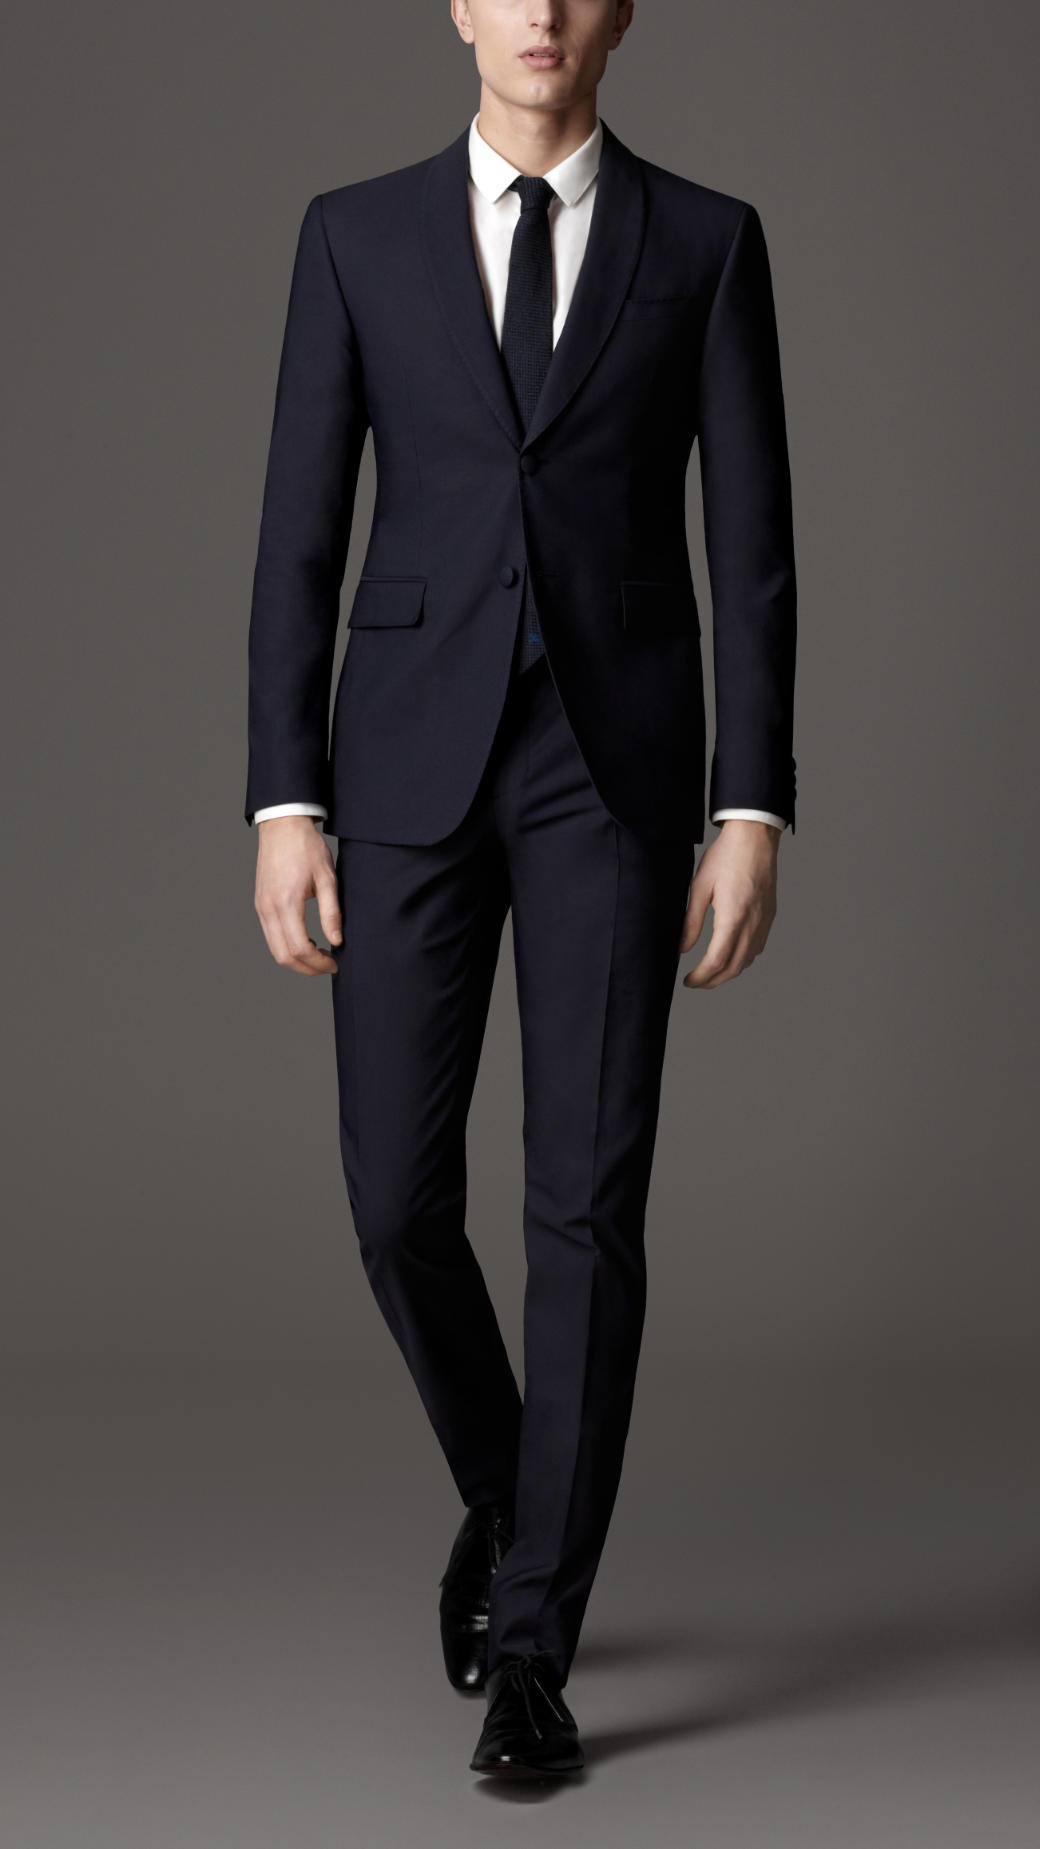 Burberry Modern Fit Shawl Collar Suit in Blue for Men - Lyst